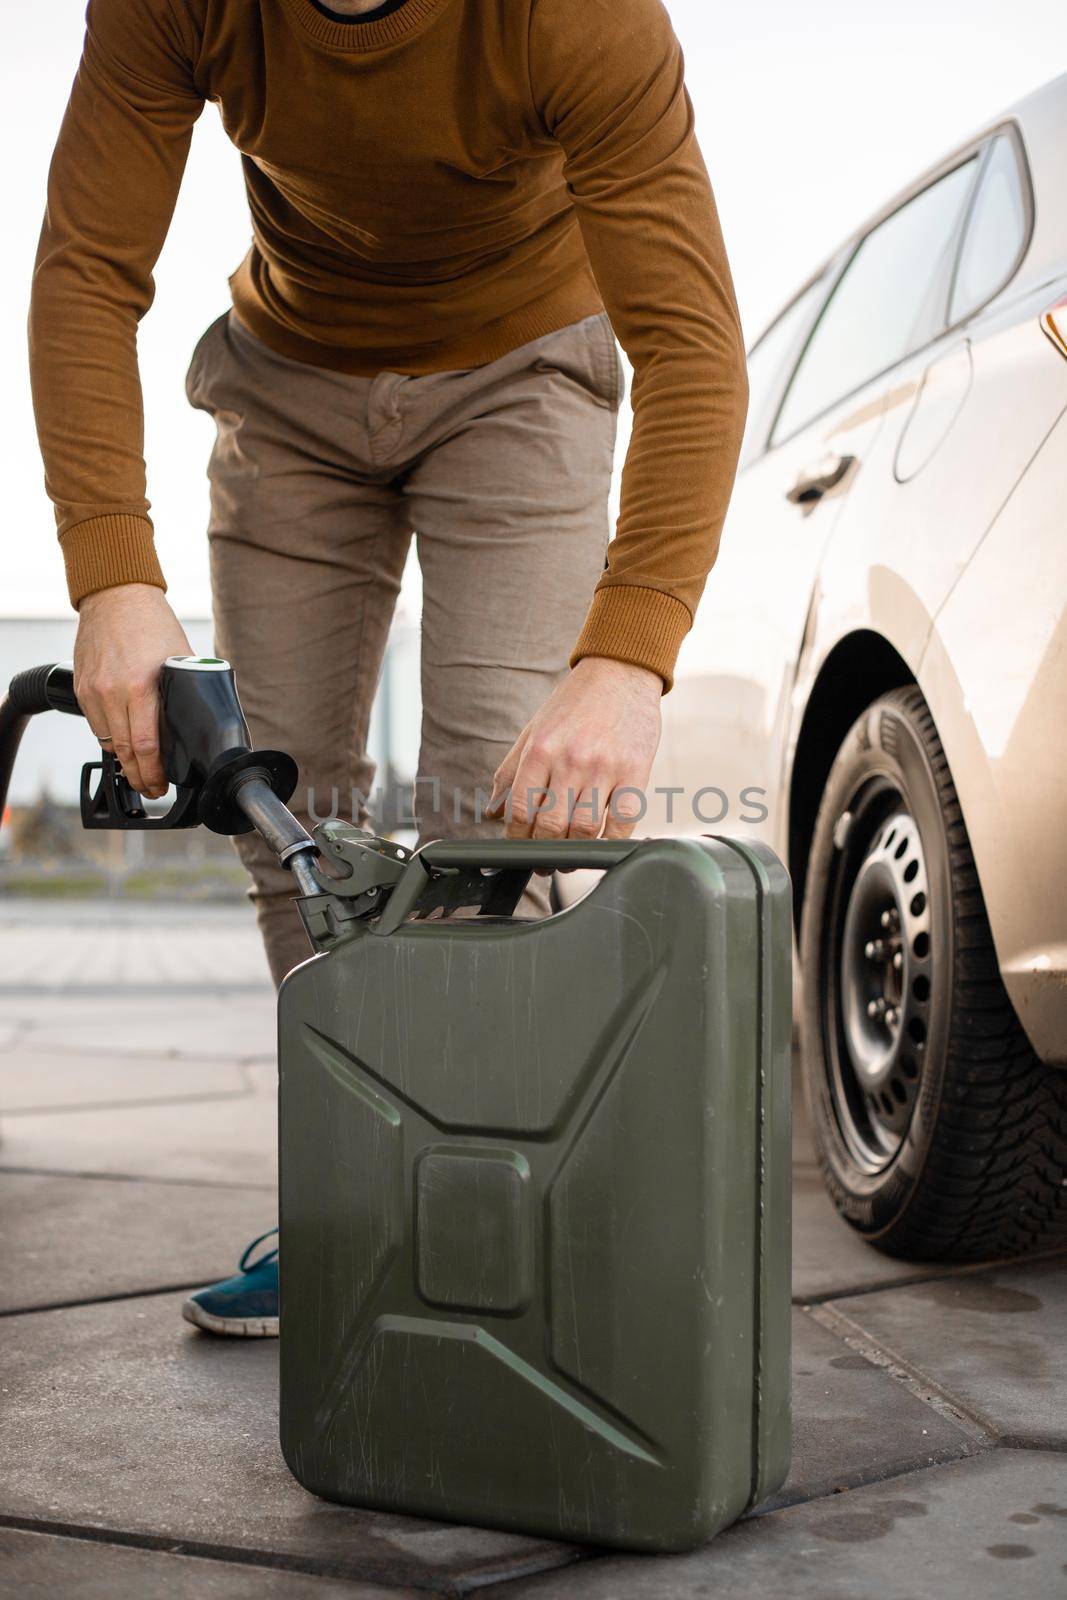 Man refilling canister with fuel on the petrol station. Close up view. Gasoline, diesel is getting more expensive